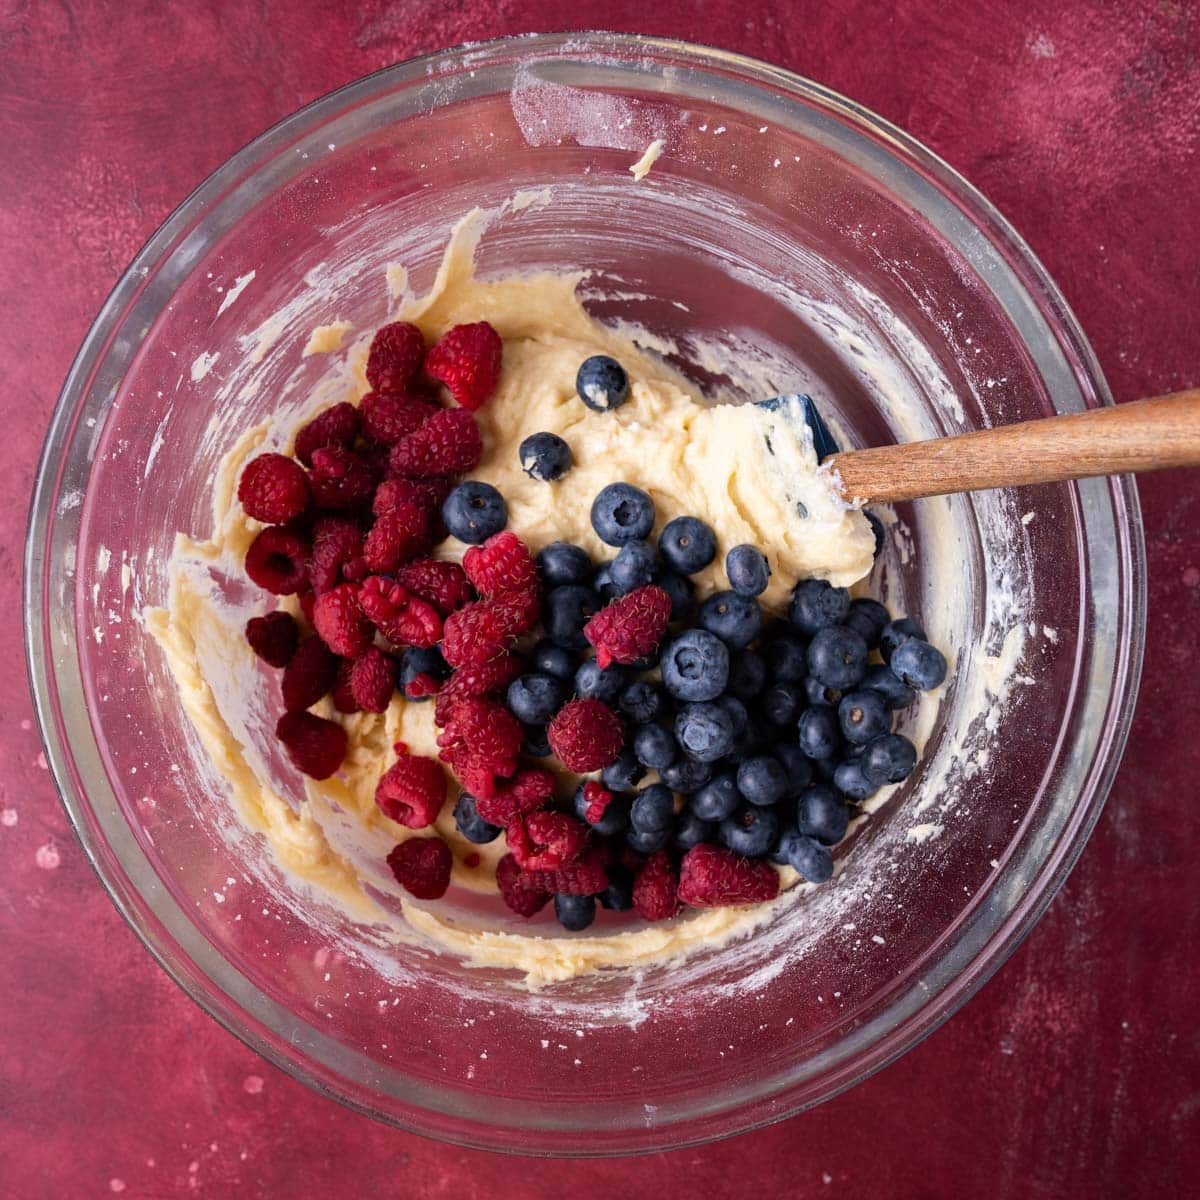 cake batter with raspberries and blueberries on it